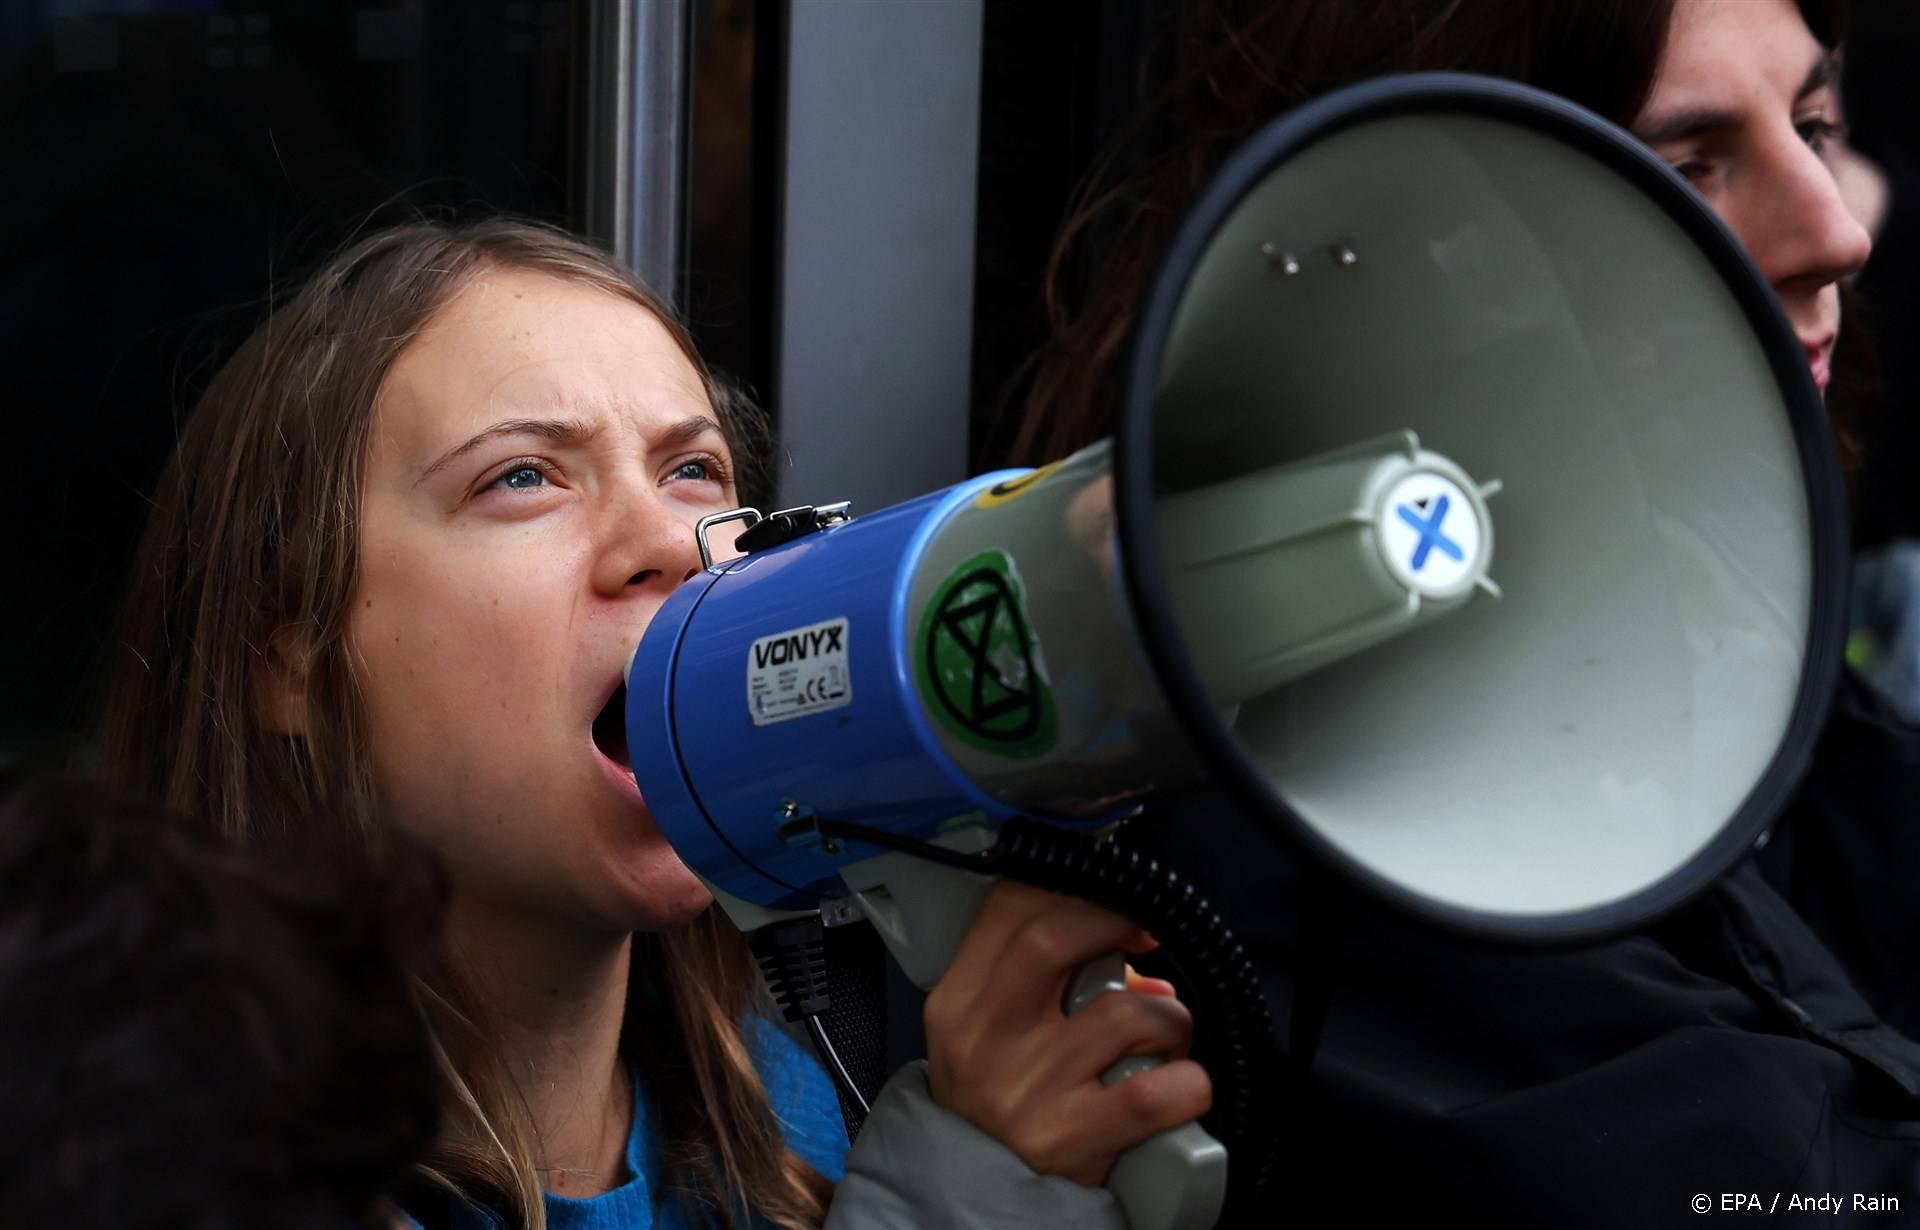 2023-10-19 10:26:51 epa10927096 Swedish climate activist Greta Thunberg shouts slogans through a megaphone as she takes part in a Fossil Free London protest outside JP Morgan and Barclays Headquarters at Canary Wharf in London, Britain, 19 October 2023. Climate activist Thunberg joined others during the climate change protest organized by the group Fossil Free London.  EPA/ANDY RAIN